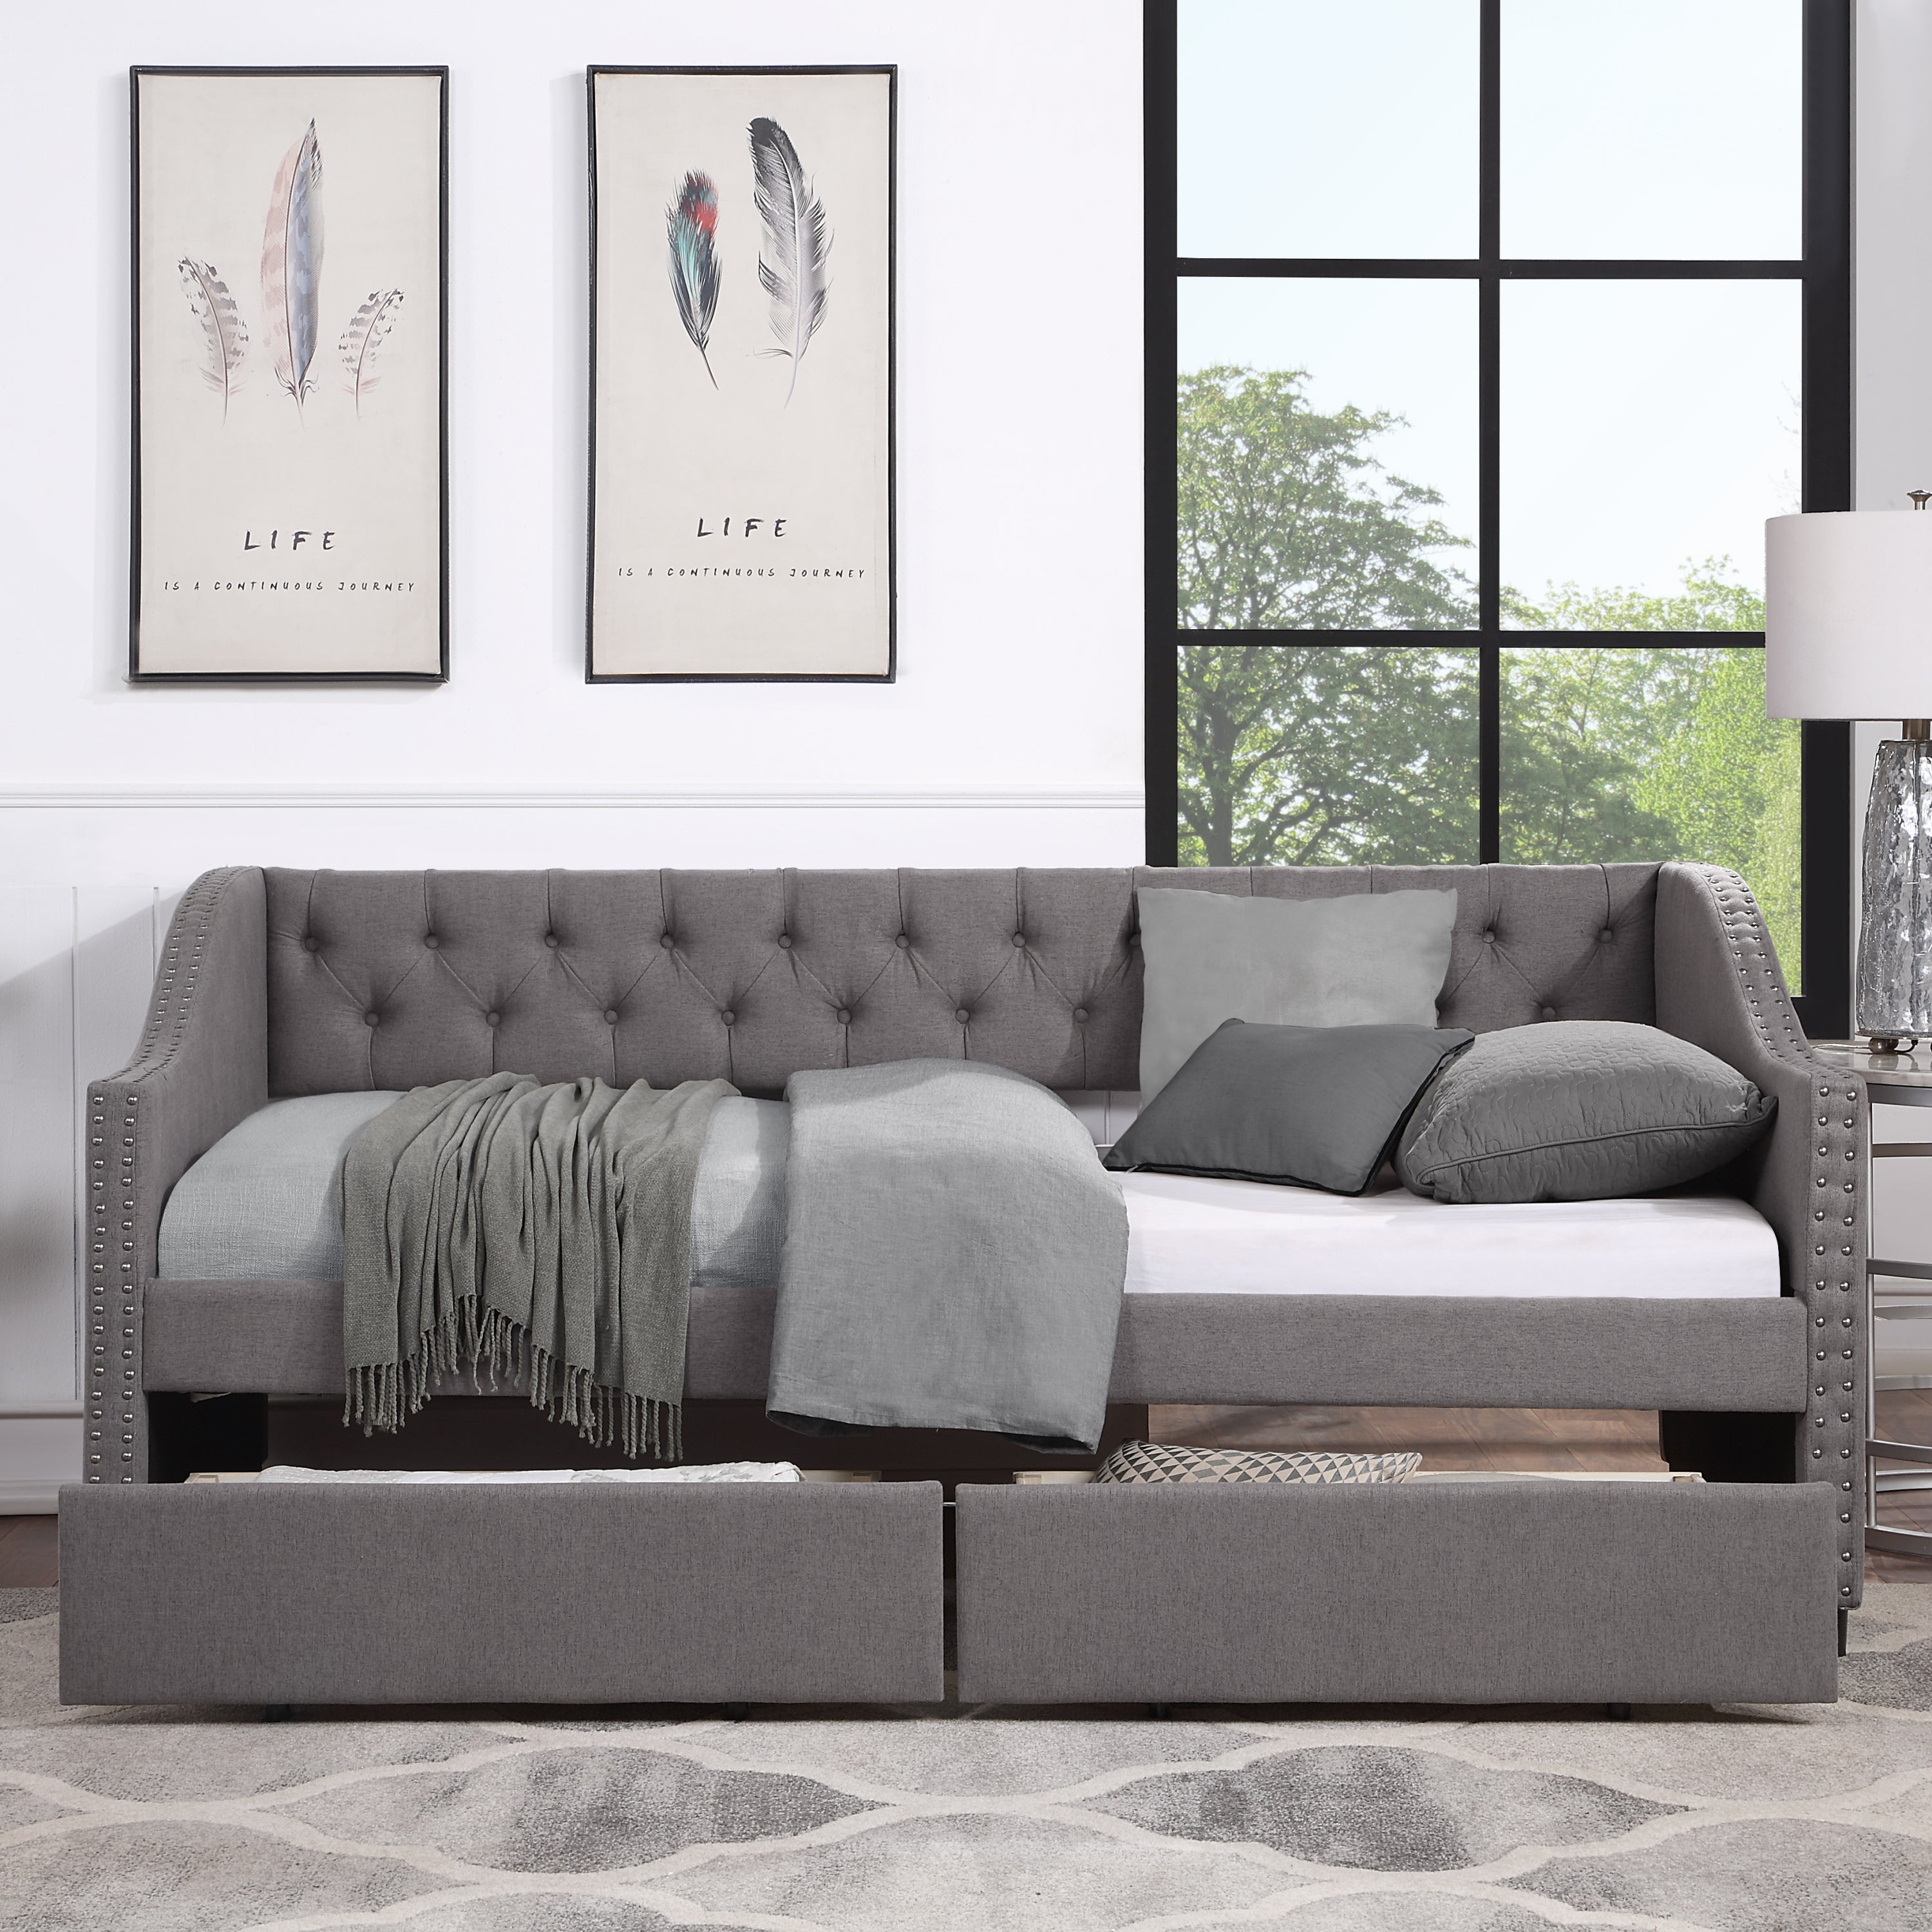 Twin Size Upholstered Daybed with Two Drawers (Gray)